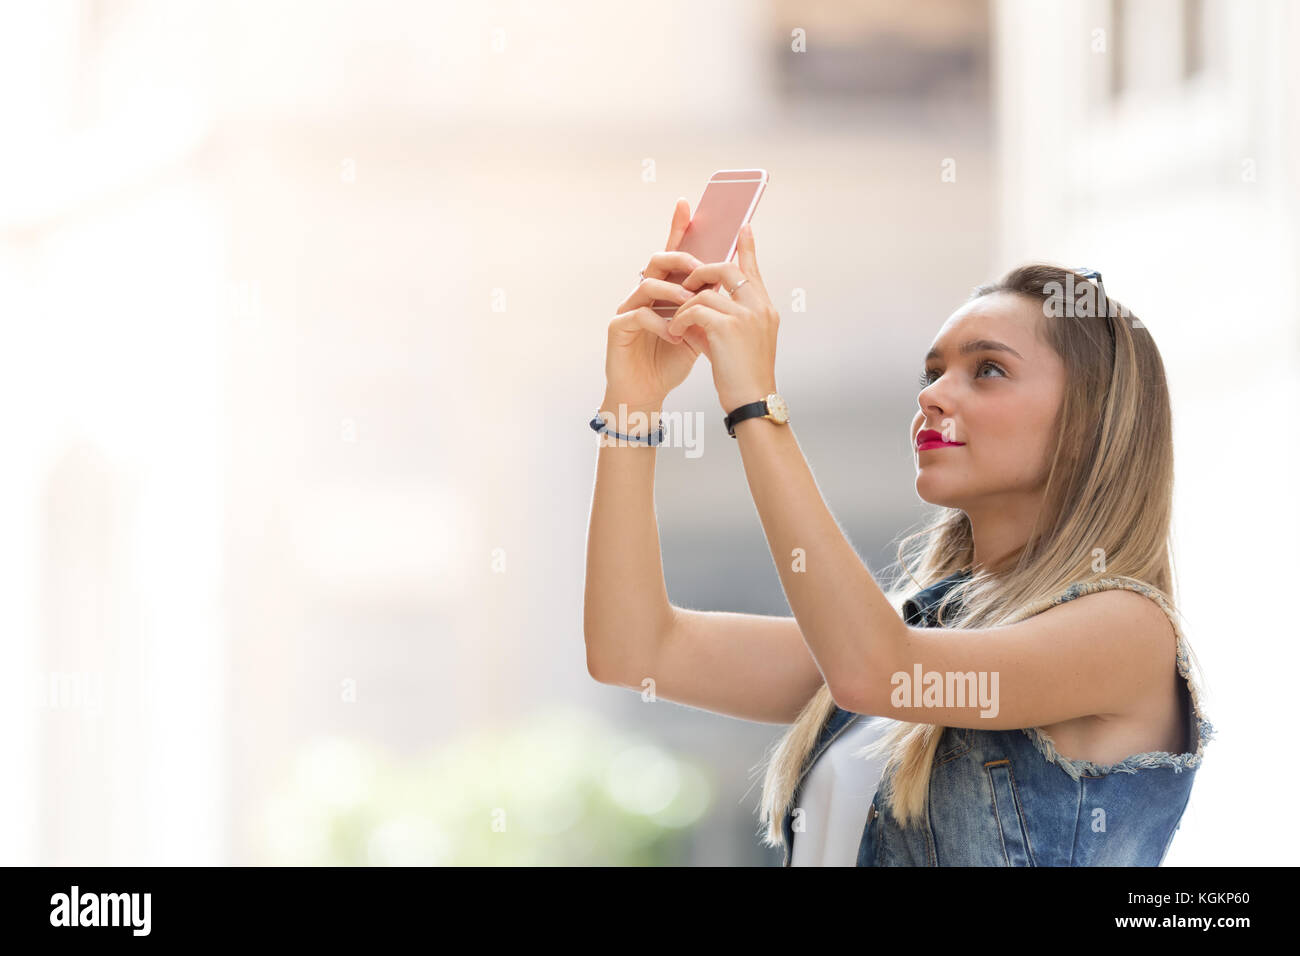 Pretty blonde teenager taking a photo with her mobile phone Stock Photo